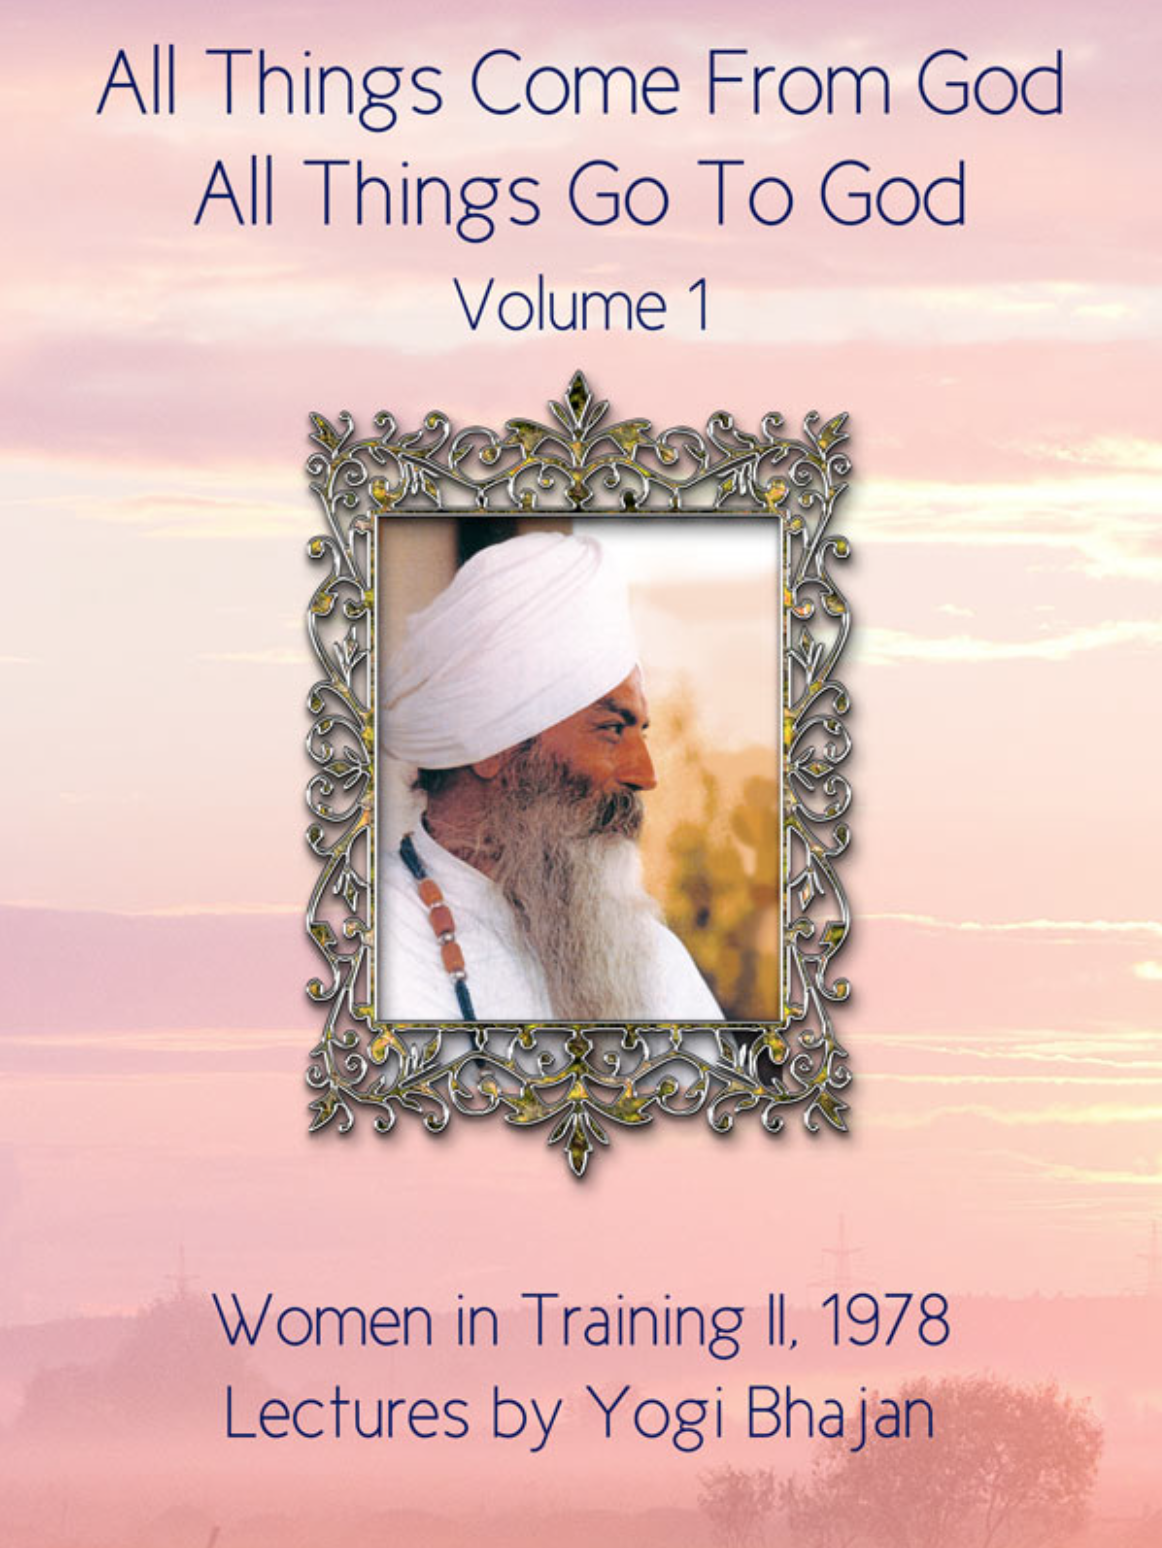 All Things Come From God and All Things Go to God Vol. 1 - Yogi Bhajan - eBook